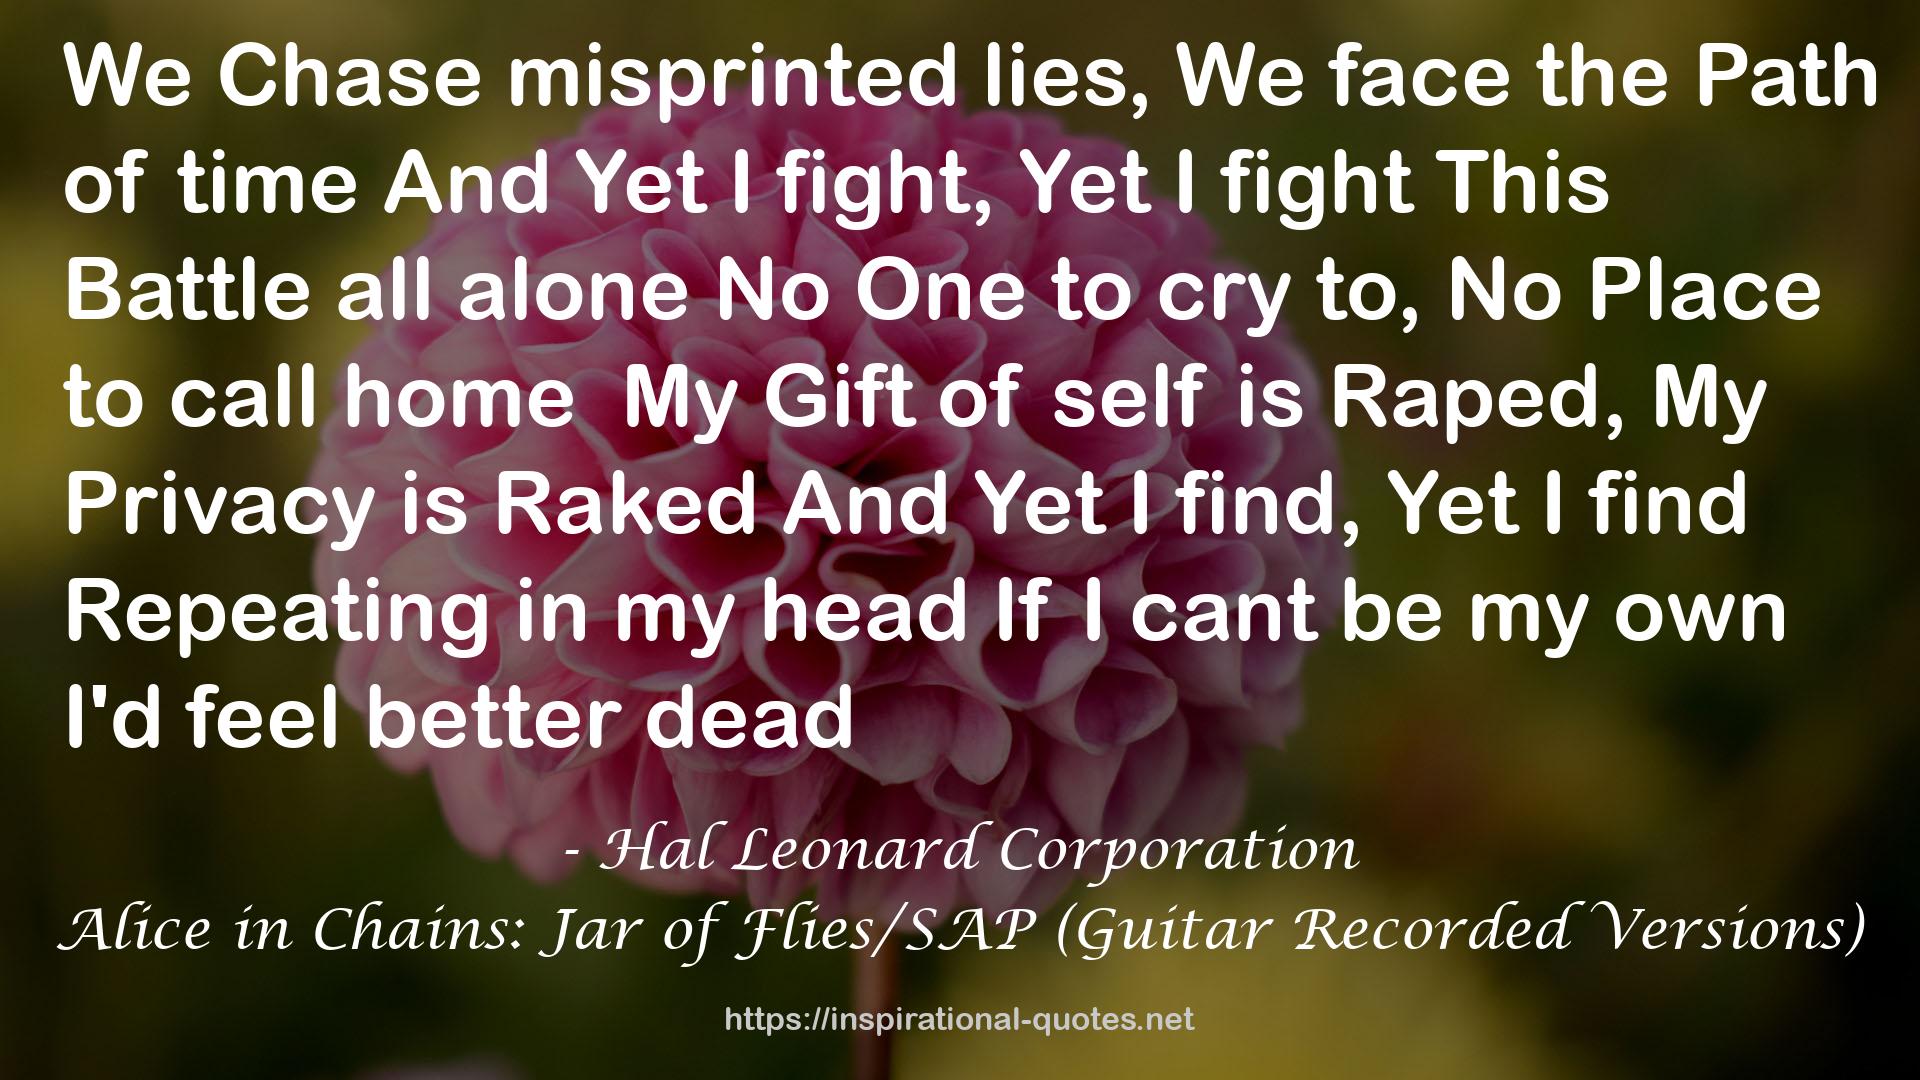 Alice in Chains: Jar of Flies/SAP (Guitar Recorded Versions) QUOTES